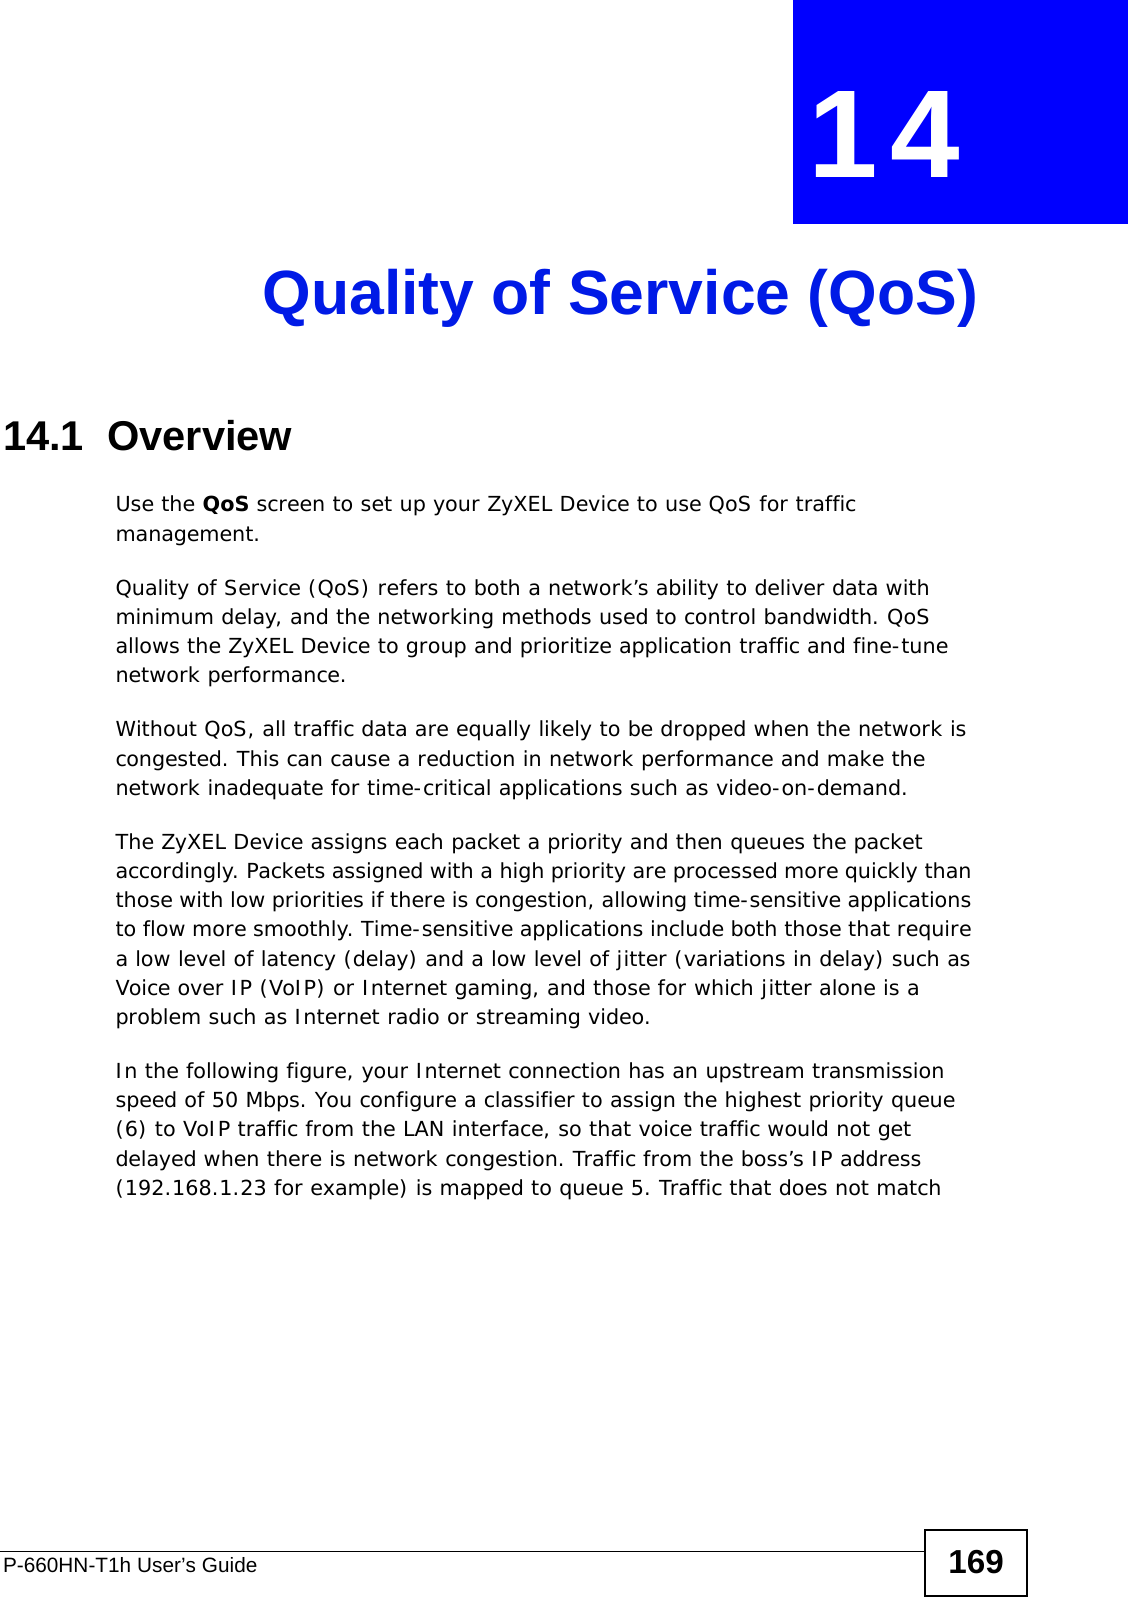 P-660HN-T1h User’s Guide 169CHAPTER  14 Quality of Service (QoS)14.1  OverviewUse the QoS screen to set up your ZyXEL Device to use QoS for traffic management. Quality of Service (QoS) refers to both a network’s ability to deliver data with minimum delay, and the networking methods used to control bandwidth. QoS allows the ZyXEL Device to group and prioritize application traffic and fine-tune network performance. Without QoS, all traffic data are equally likely to be dropped when the network is congested. This can cause a reduction in network performance and make the network inadequate for time-critical applications such as video-on-demand.The ZyXEL Device assigns each packet a priority and then queues the packet accordingly. Packets assigned with a high priority are processed more quickly than those with low priorities if there is congestion, allowing time-sensitive applications to flow more smoothly. Time-sensitive applications include both those that require a low level of latency (delay) and a low level of jitter (variations in delay) such as Voice over IP (VoIP) or Internet gaming, and those for which jitter alone is a problem such as Internet radio or streaming video.In the following figure, your Internet connection has an upstream transmission speed of 50 Mbps. You configure a classifier to assign the highest priority queue (6) to VoIP traffic from the LAN interface, so that voice traffic would not get delayed when there is network congestion. Traffic from the boss’s IP address (192.168.1.23 for example) is mapped to queue 5. Traffic that does not match 